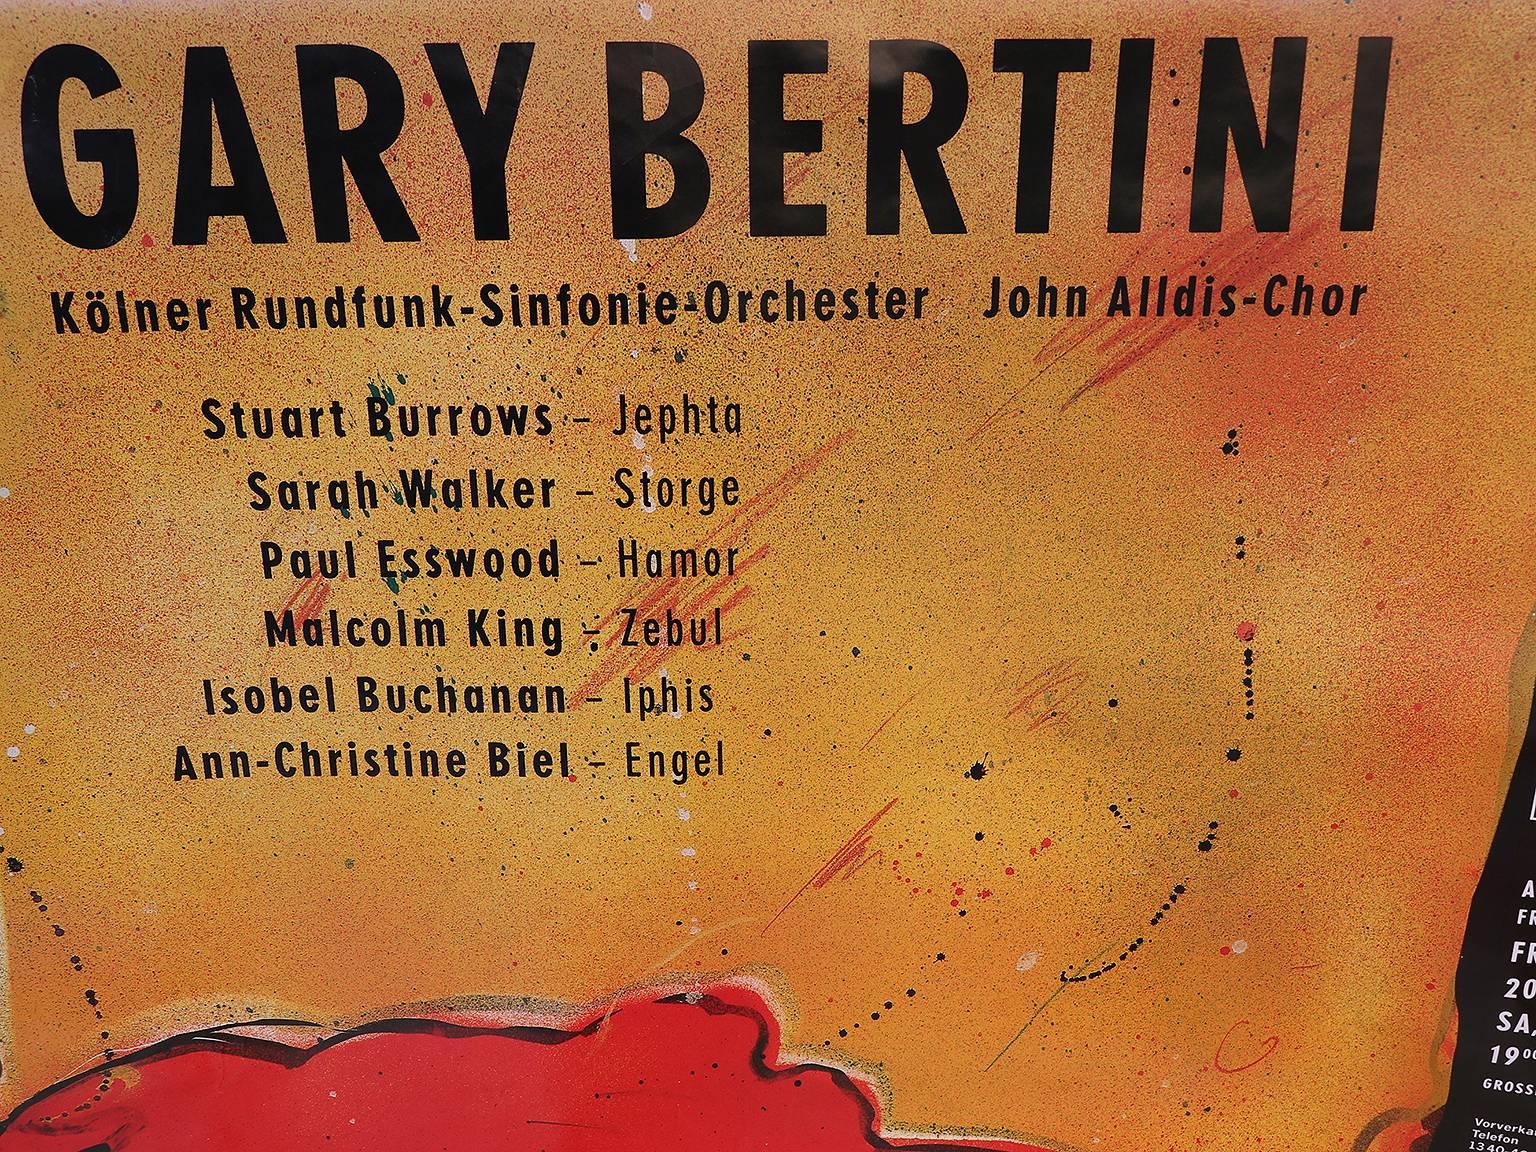 Gary Bertini - Jephta, concert poster 1985 Alte Oper Frankfurt, Germany.
Not framed, has not been folded, rolled up.
Size: 118 x 84 cm.
Two pieces available. 